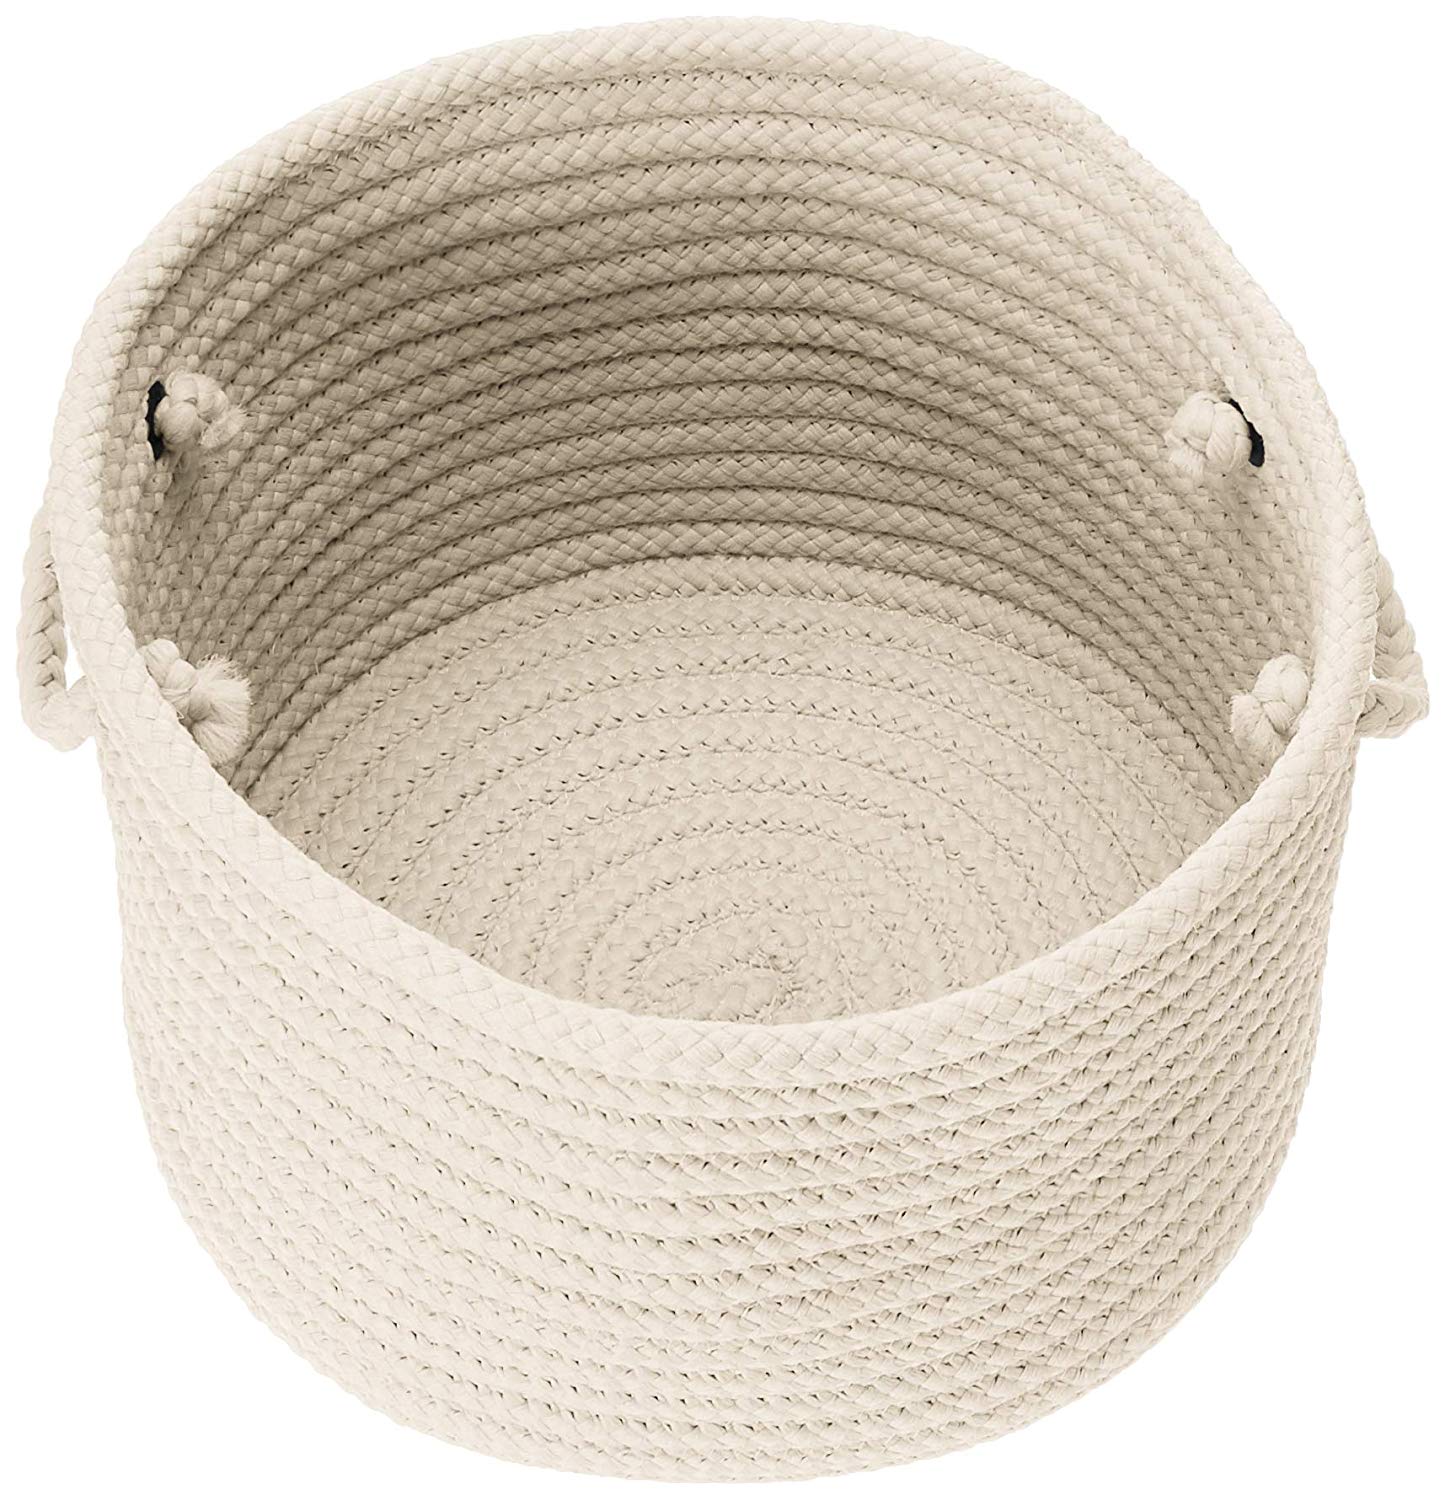 Colonial Mills 24" White Handcrafted Round Braided Basket - image 3 of 6